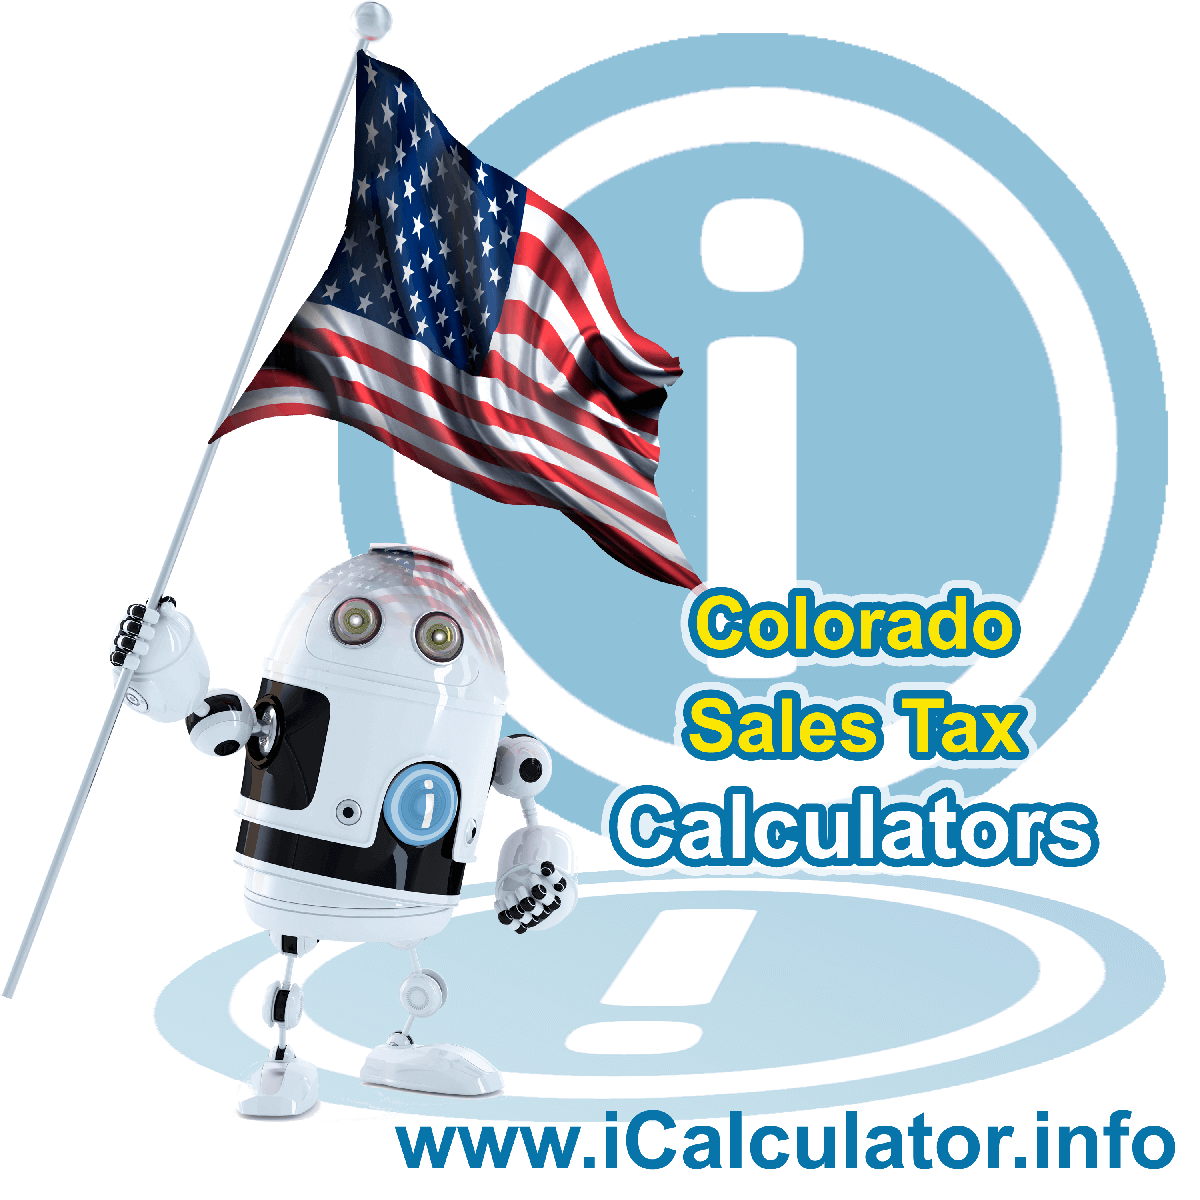 Sterling Sales Rates: This image illustrates a calculator robot calculating Sterling sales tax manually using the Sterling Sales Tax Formula. You can use this information to calculate Sterling Sales Tax manually or use the Sterling Sales Tax Calculator to calculate sales tax online.